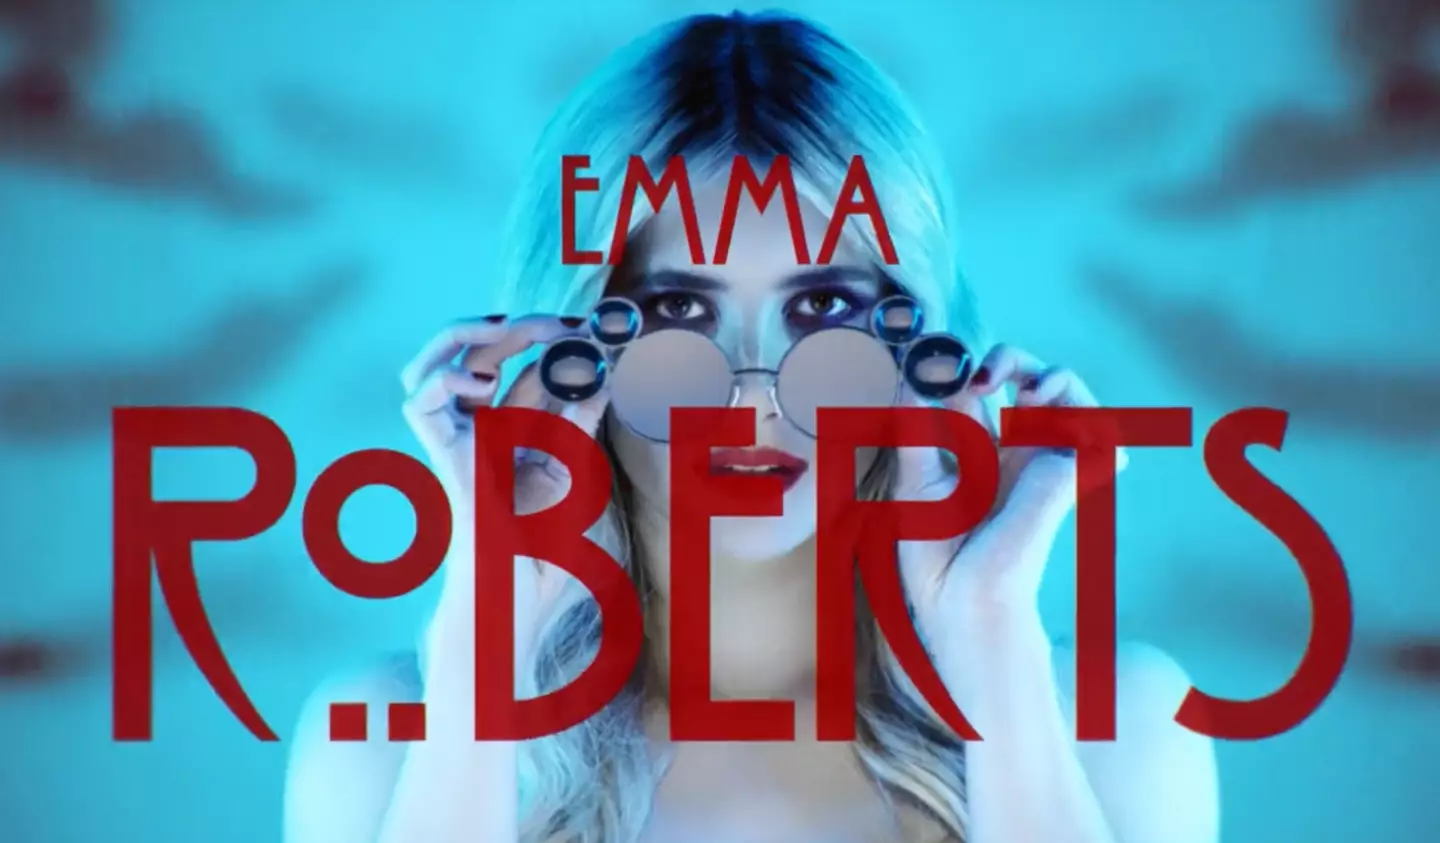 Emma Roberts is returning to the show.